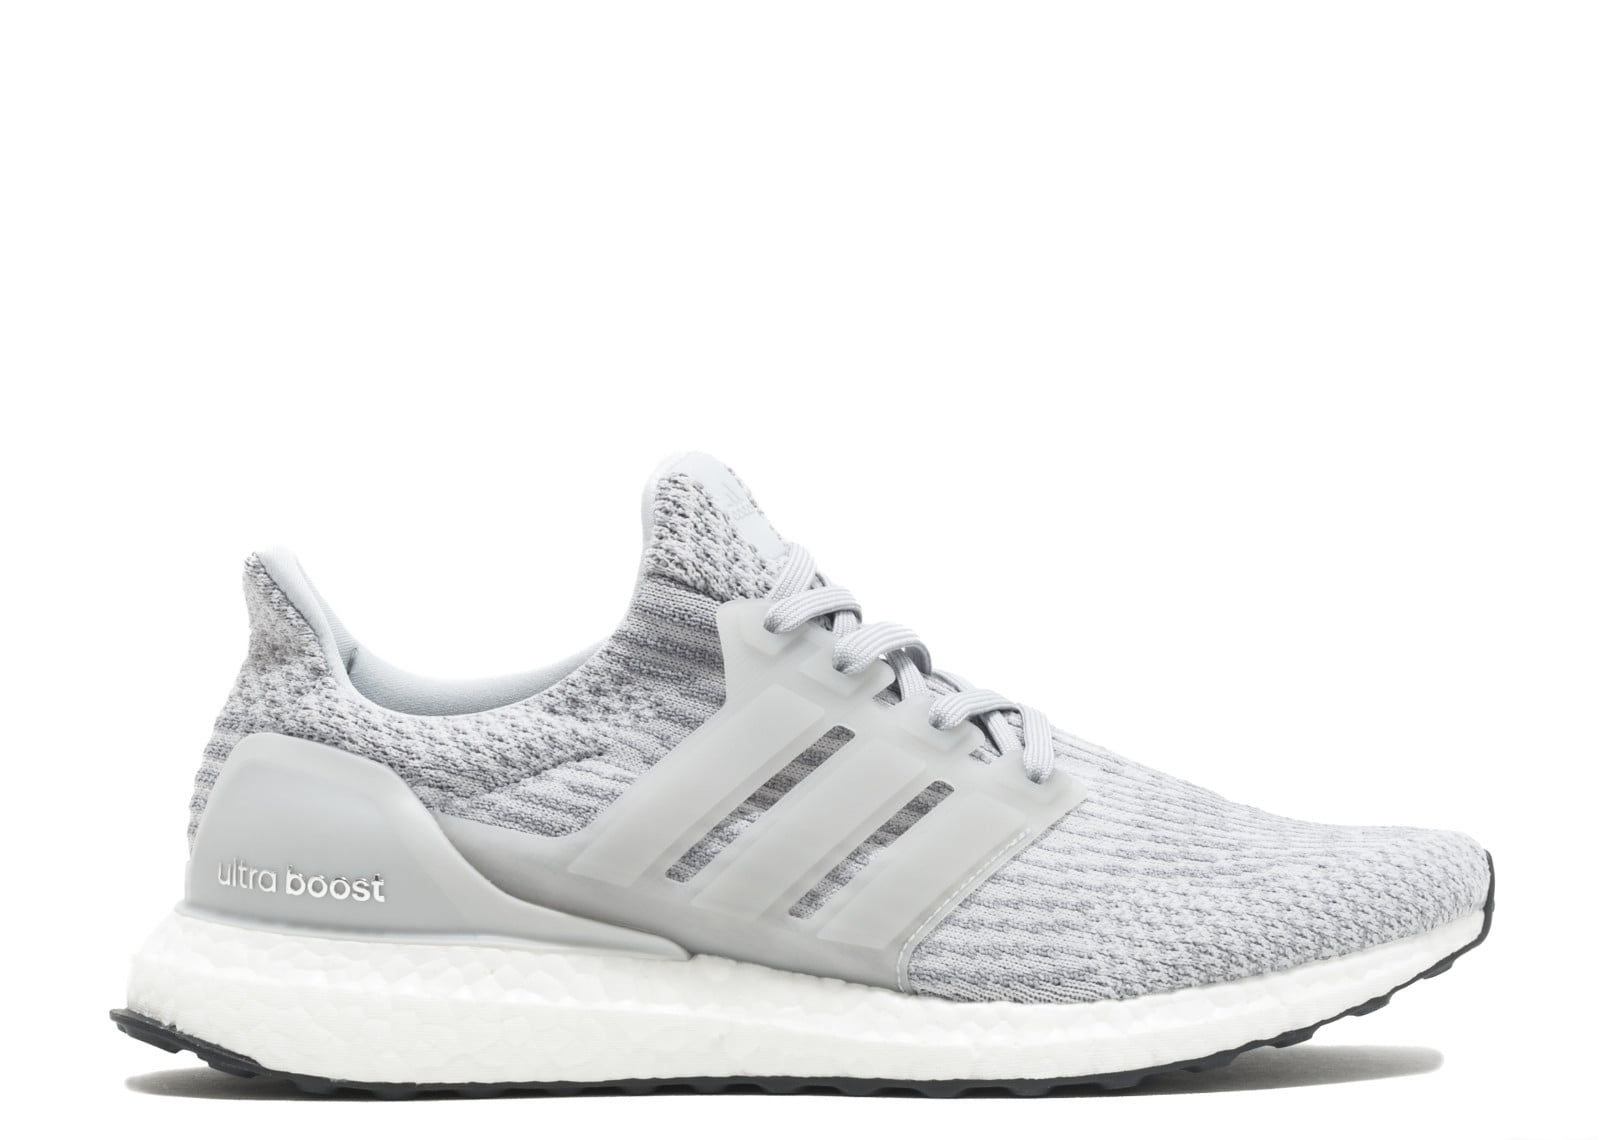 white and grey adidas ultra boost